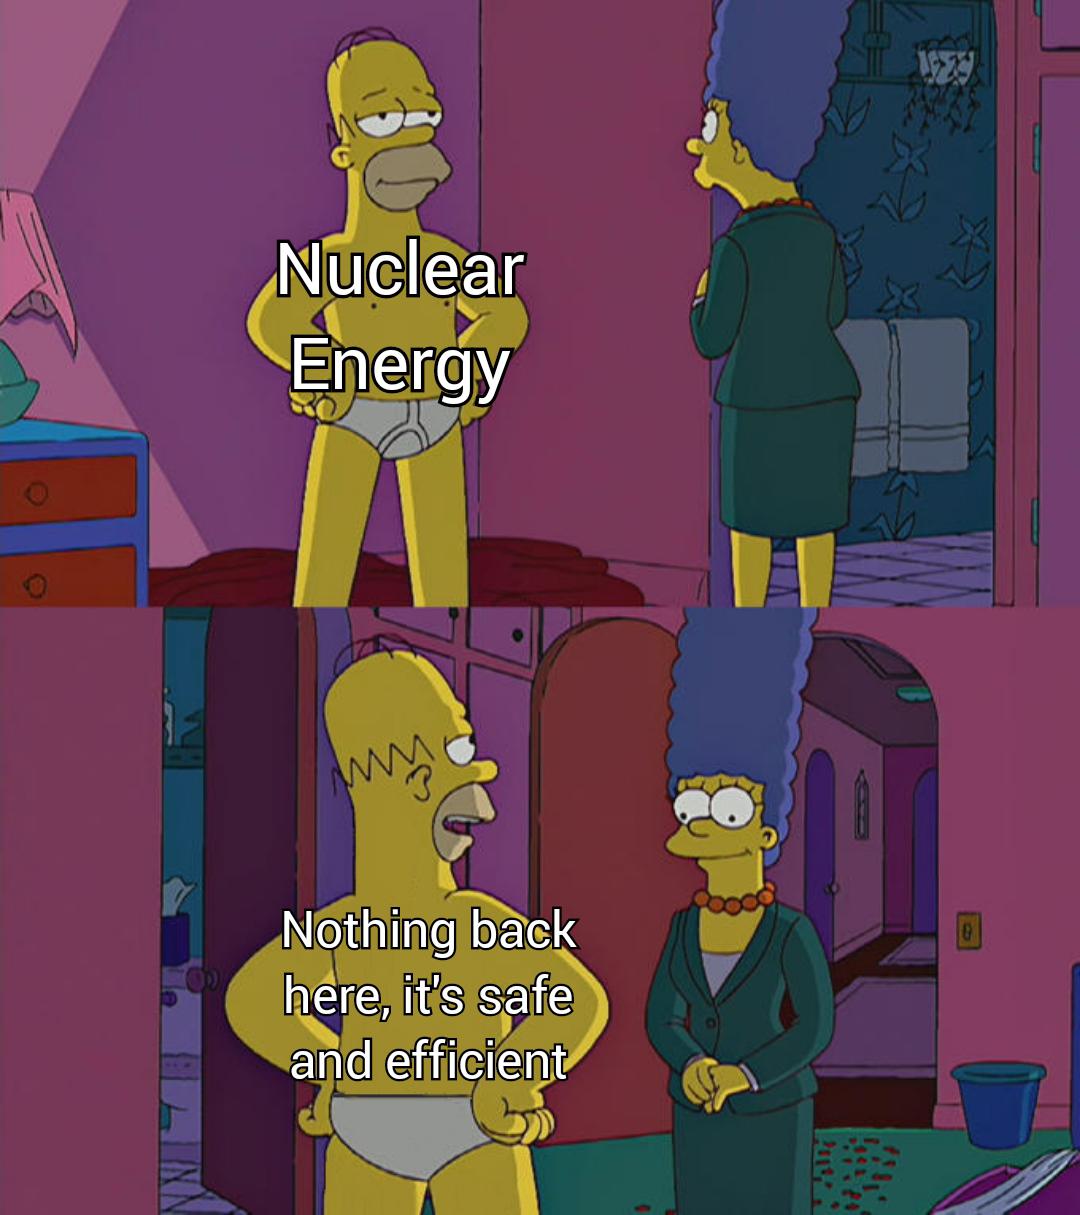 dank memes - funny memes - homer simpson back fat - Nuclear Energy any Nothing back here, it's safe and efficient